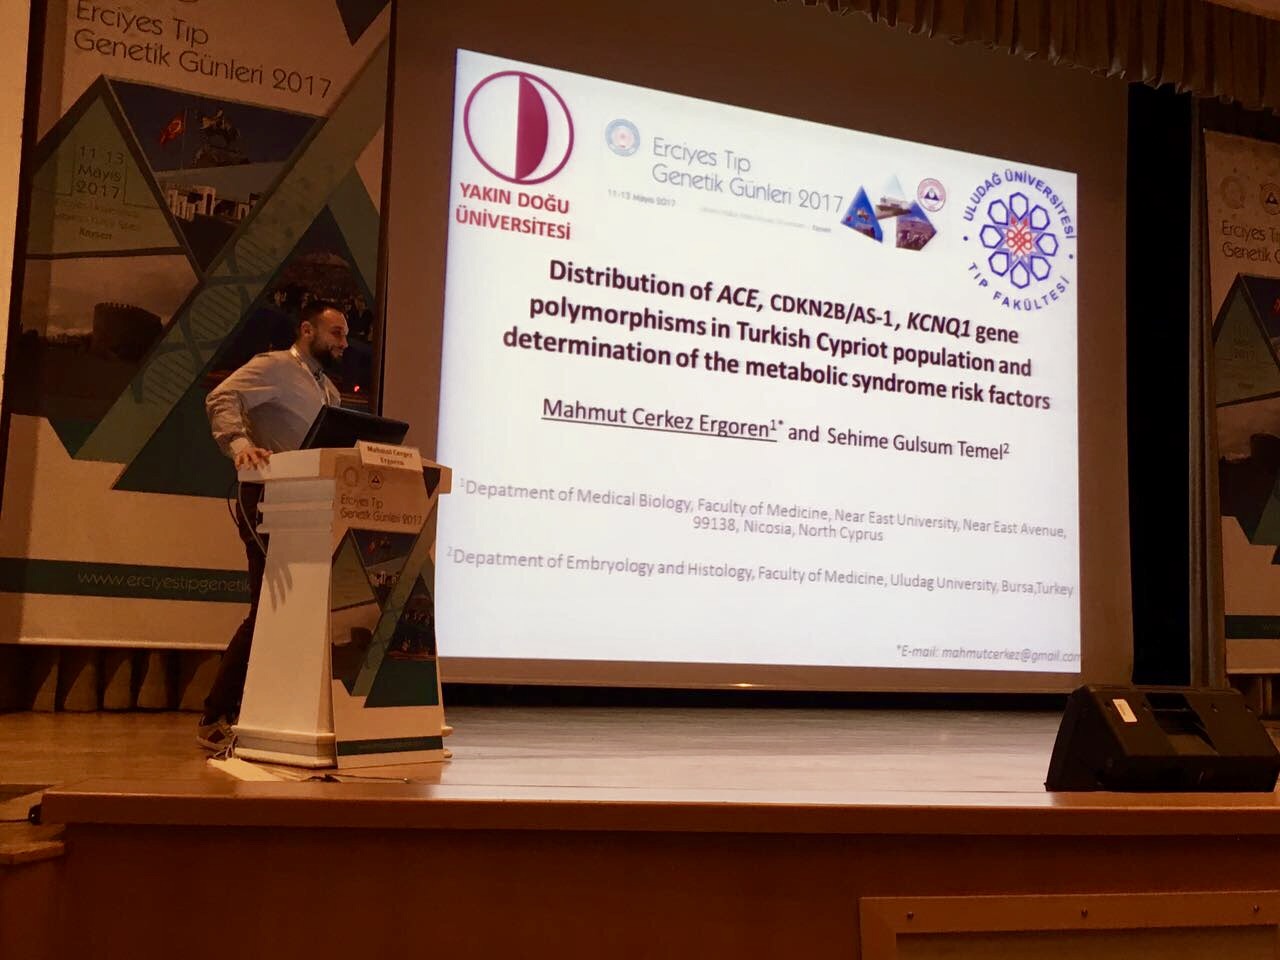 Near East University has been represented at the University of Erciyes at the Medical Genetics 2017 Congress